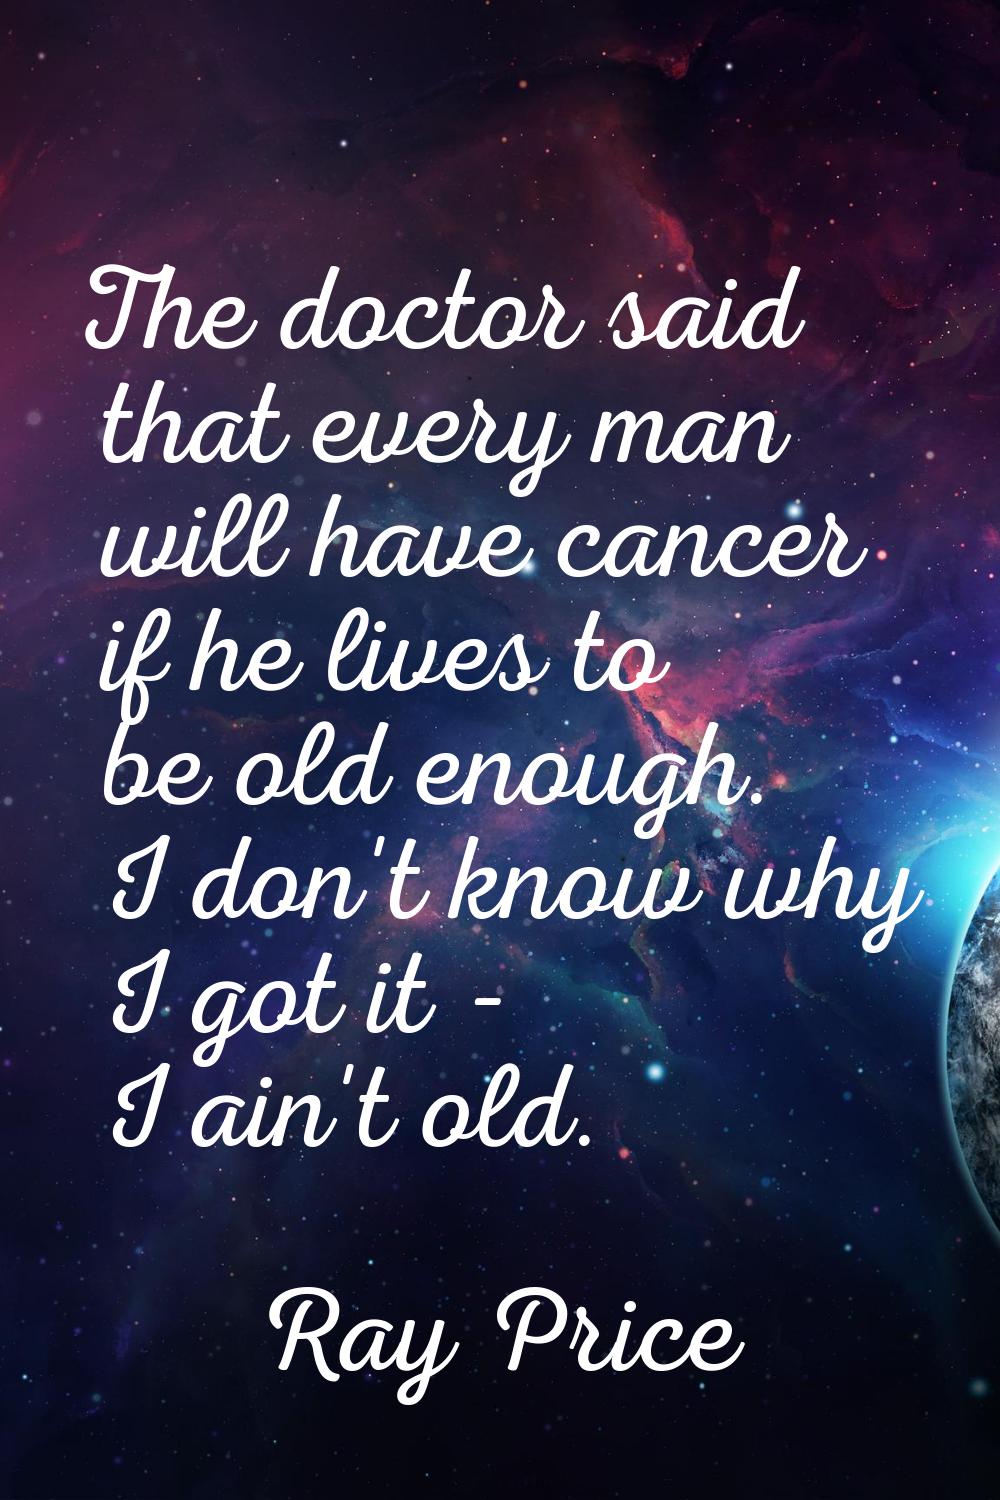 The doctor said that every man will have cancer if he lives to be old enough. I don't know why I go